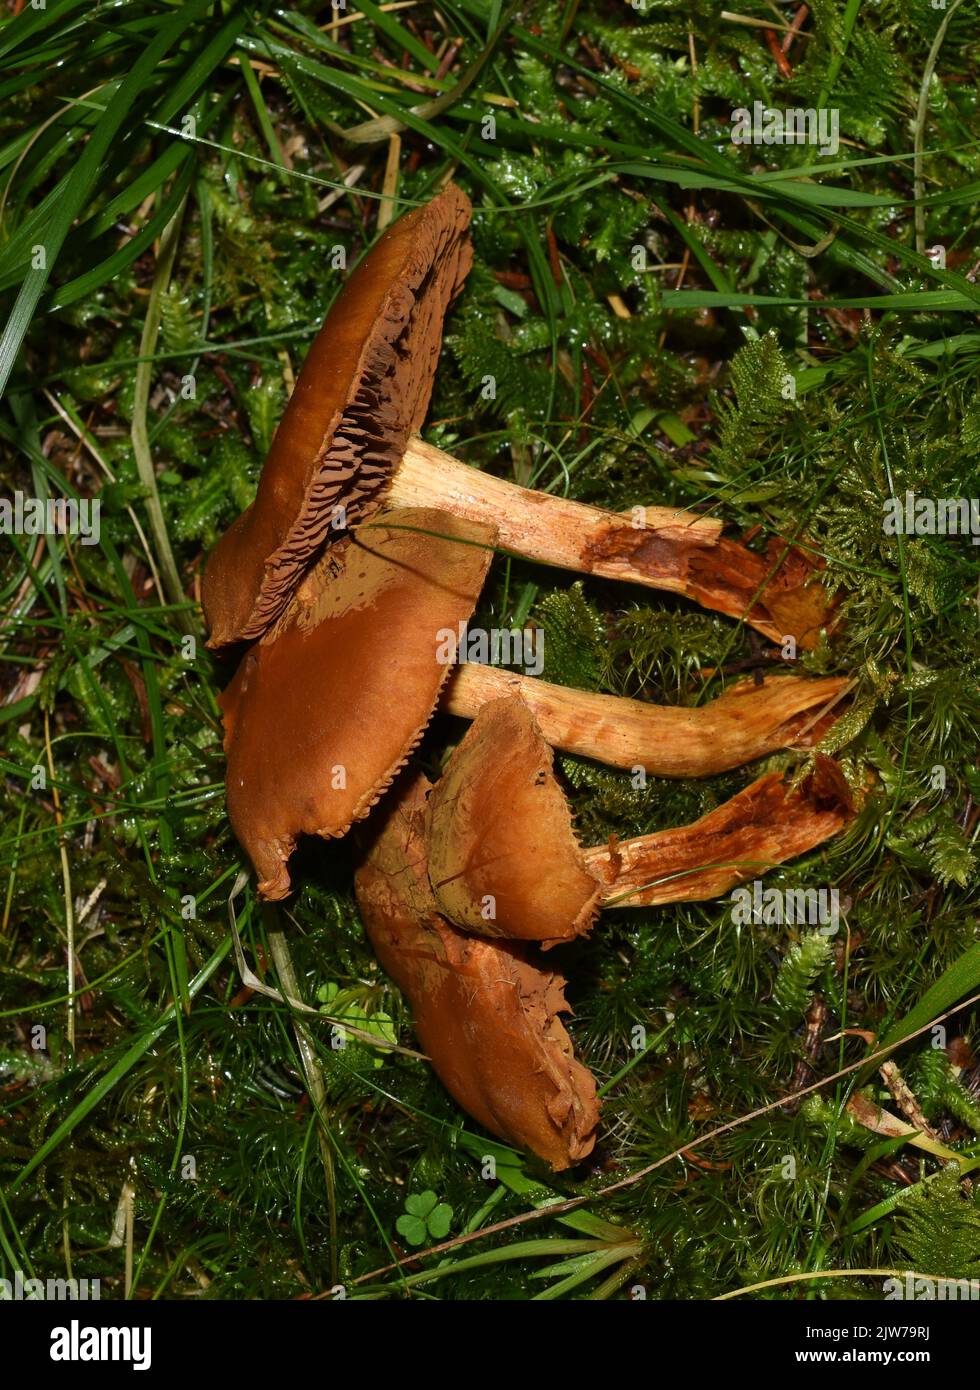 The higly toxic deadly webcap Cortinarius rubellus in a forest Stock Photo